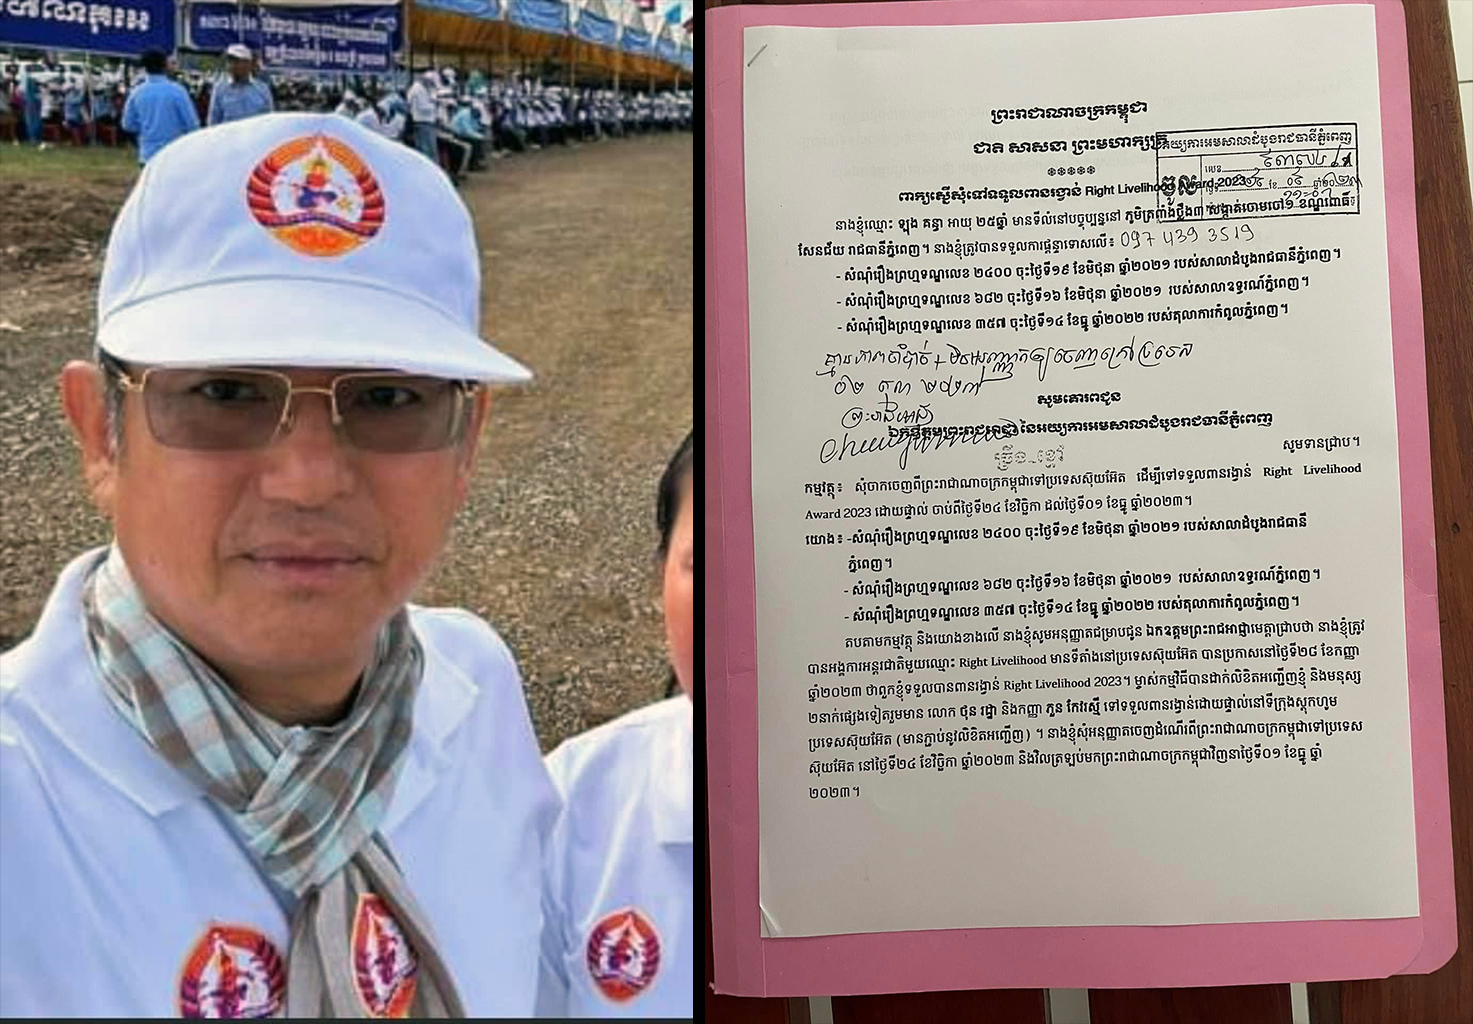 Prosecutor Chroeng Khmao in full Cambodian People’s Party uniform, and the letter issued by the Phnom Penh Municipal Court denying the activists' request for travel.